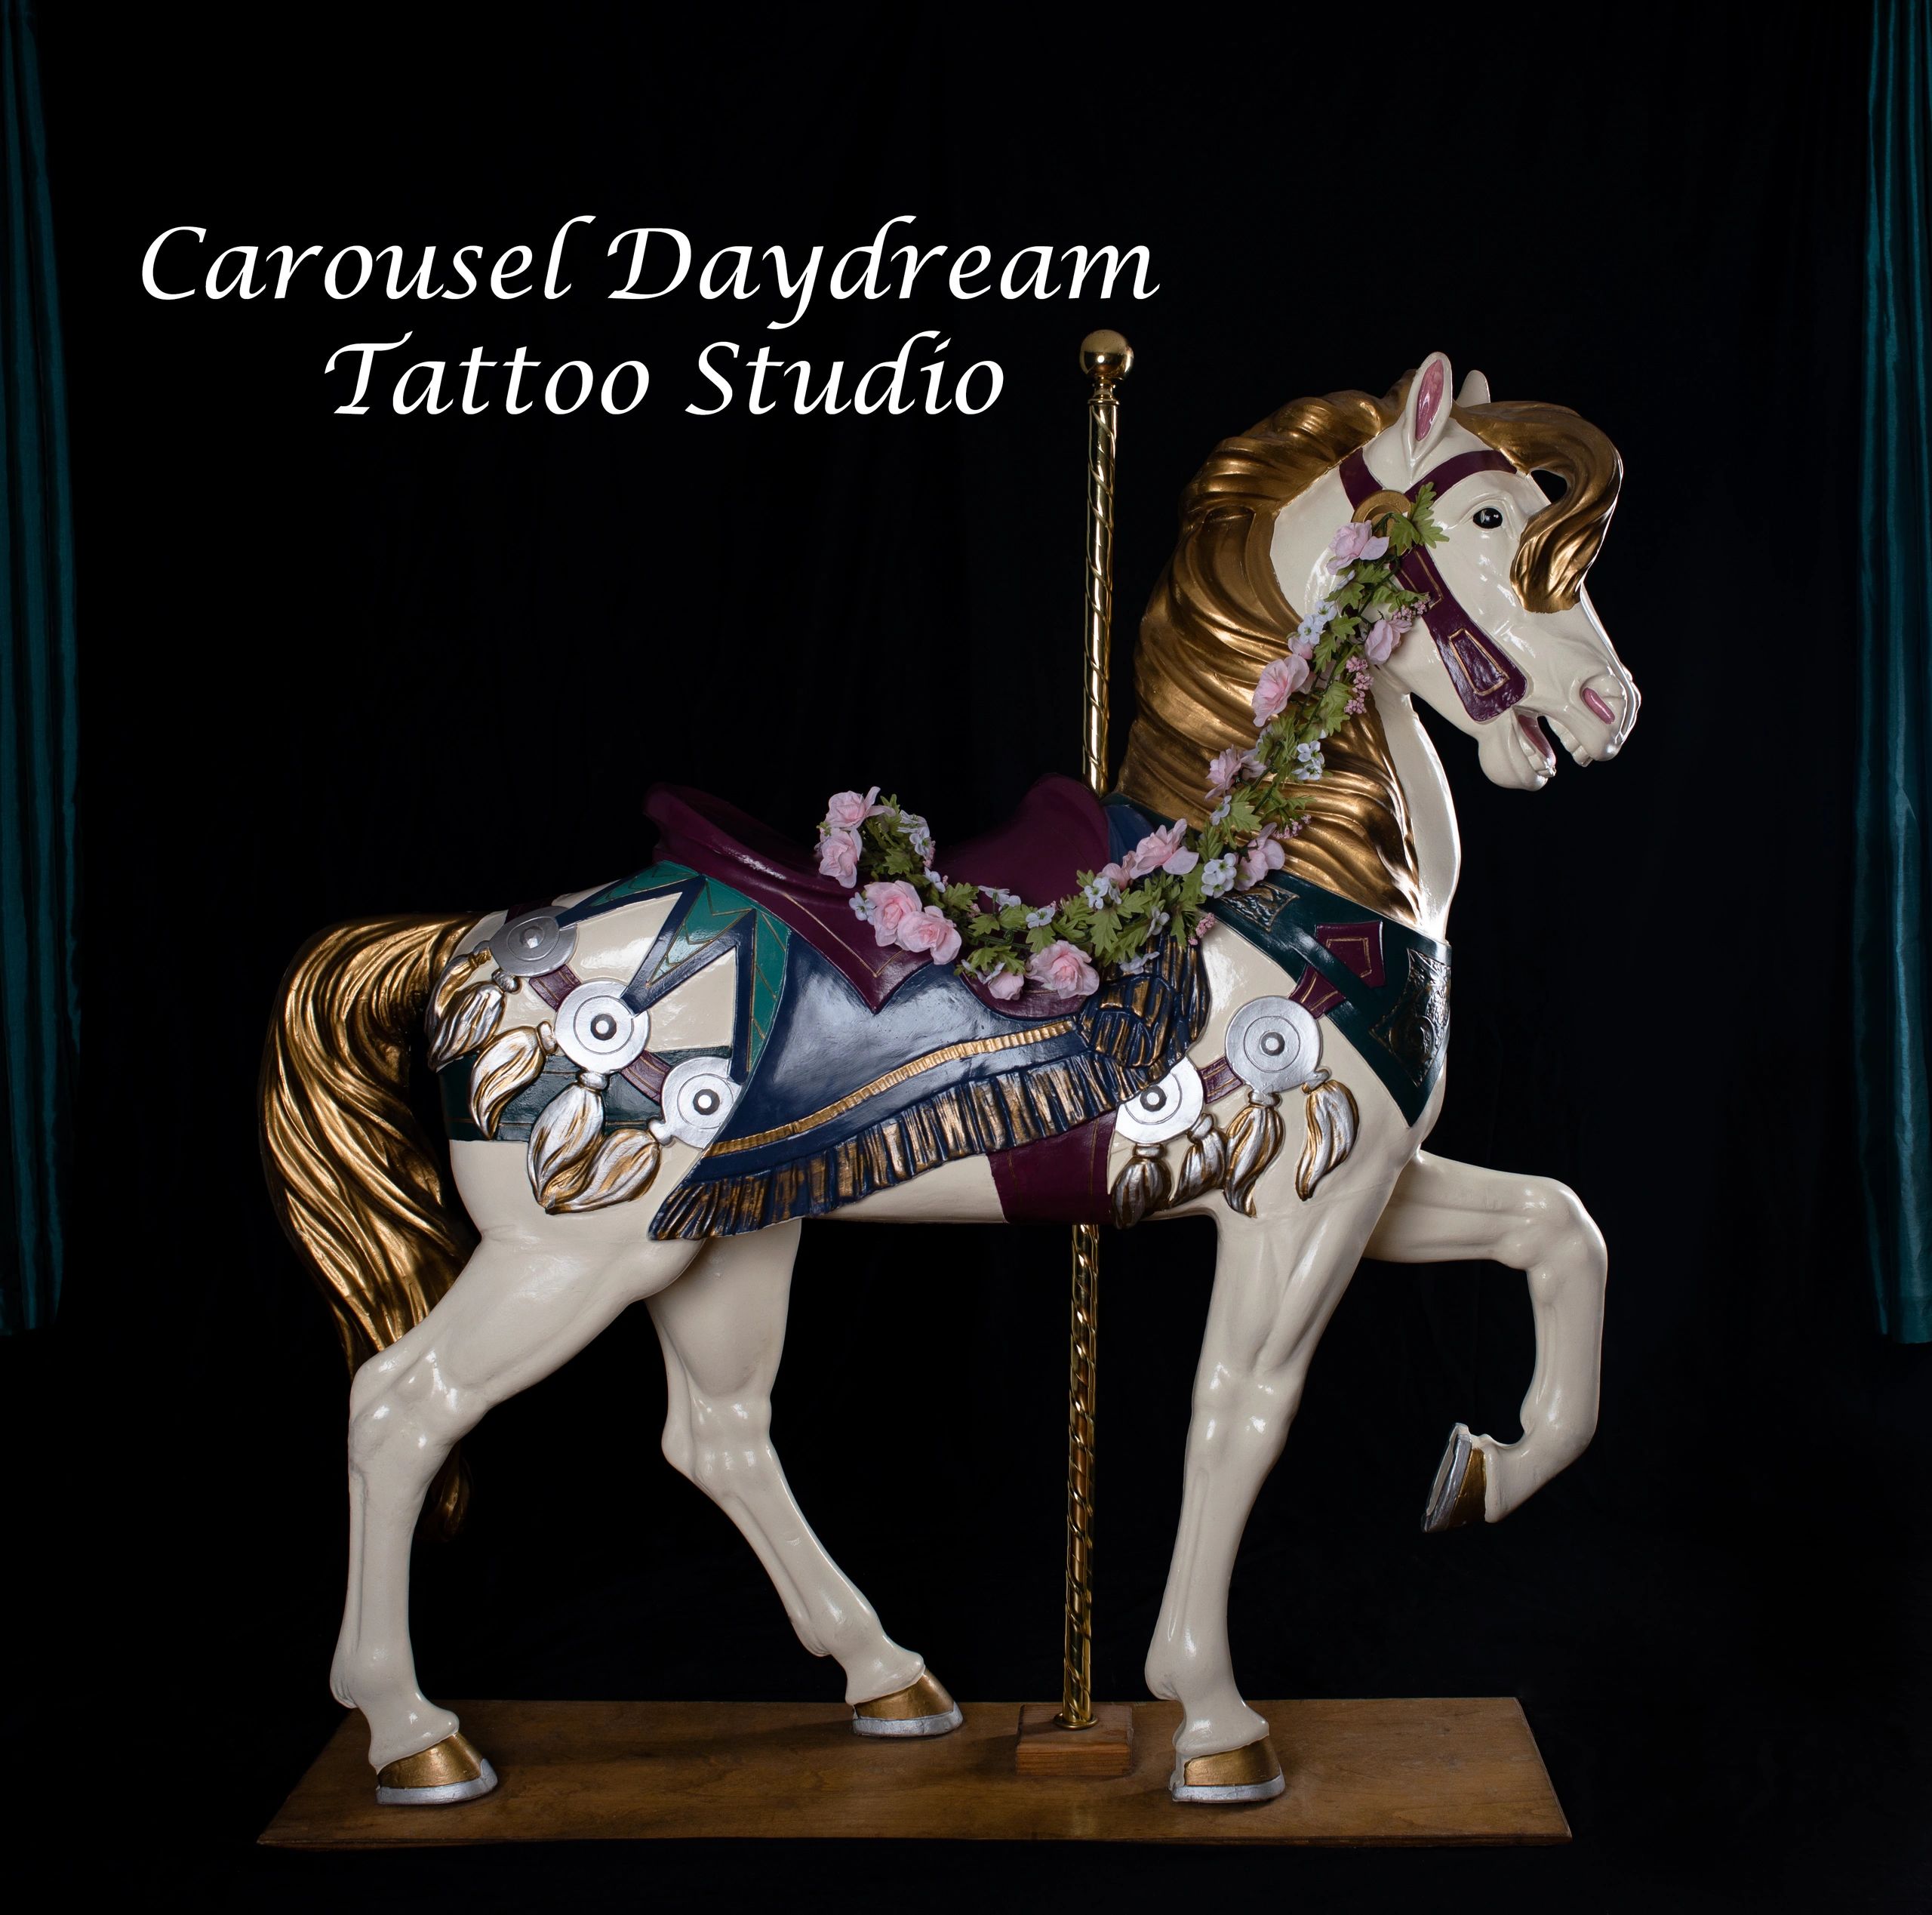 traditional carousel horse tattoo outline  Google Search  Horse tattoo  design Carousel horse tattoos Horse tattoo